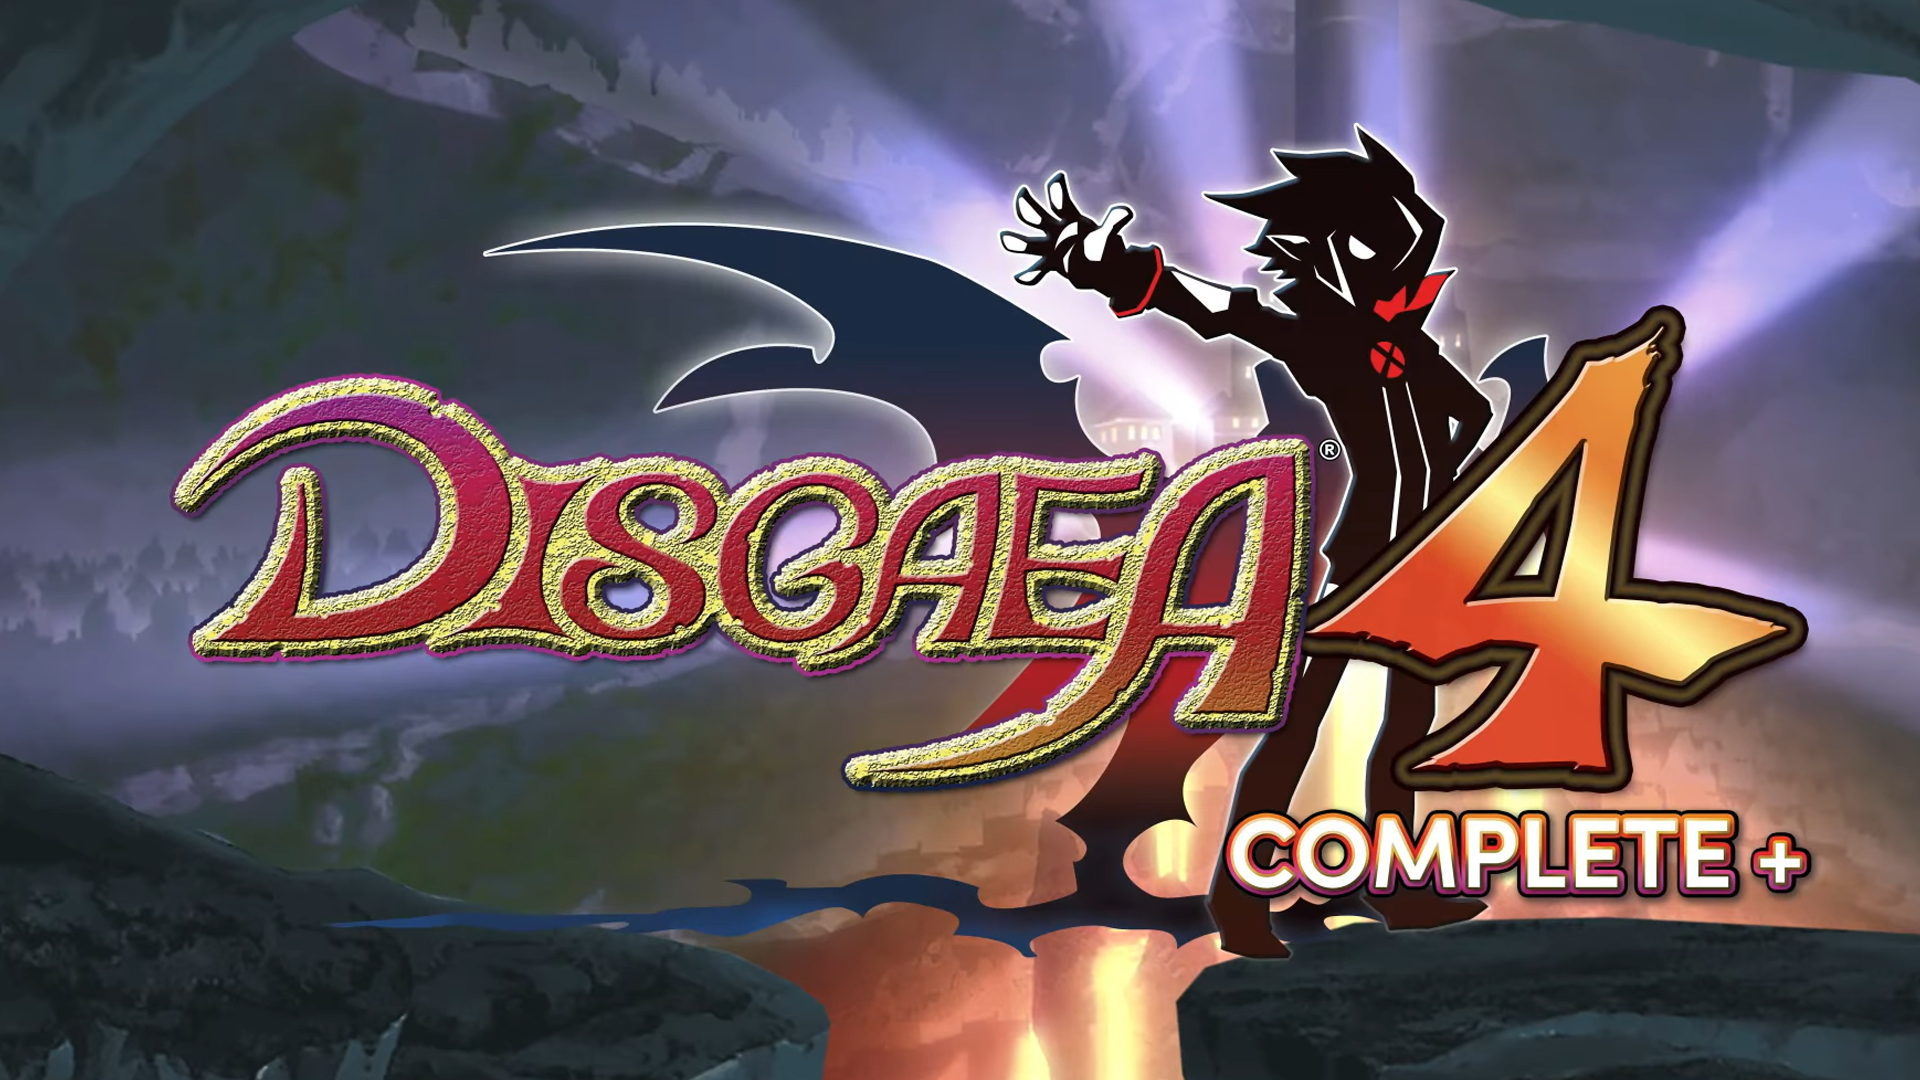 Disgaea 4 Complete+ Update: PC Version's New Features